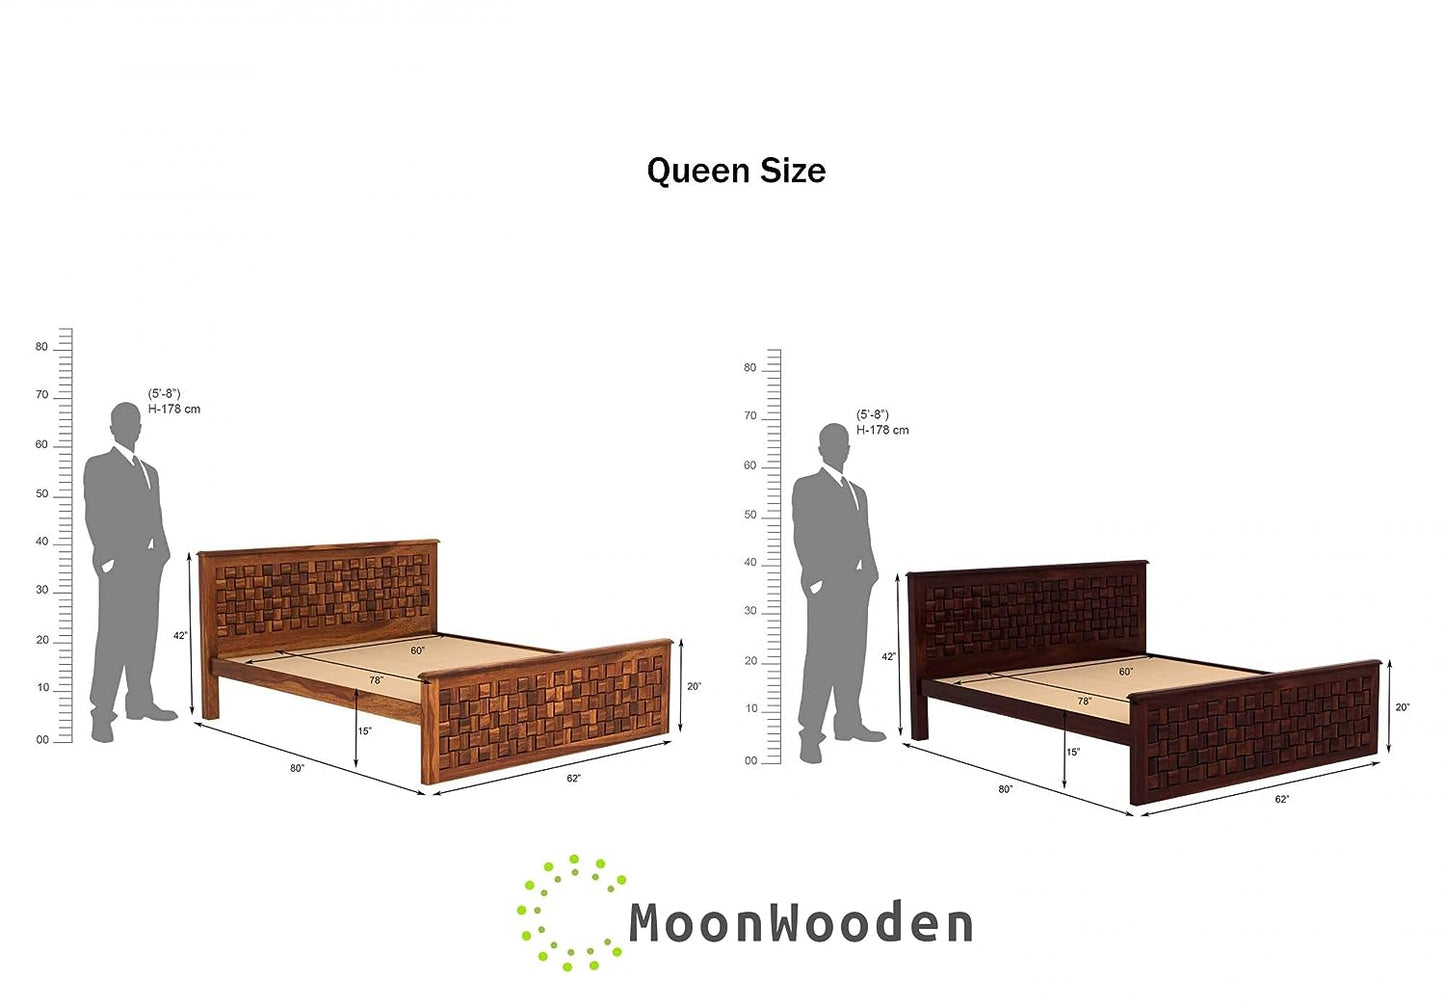 MoonWooden Sheesham Wood Bed Without Storage Wooden Double Bed Cot Bed Furniture for Bedroom Living Room Home (Model-2, Queen)